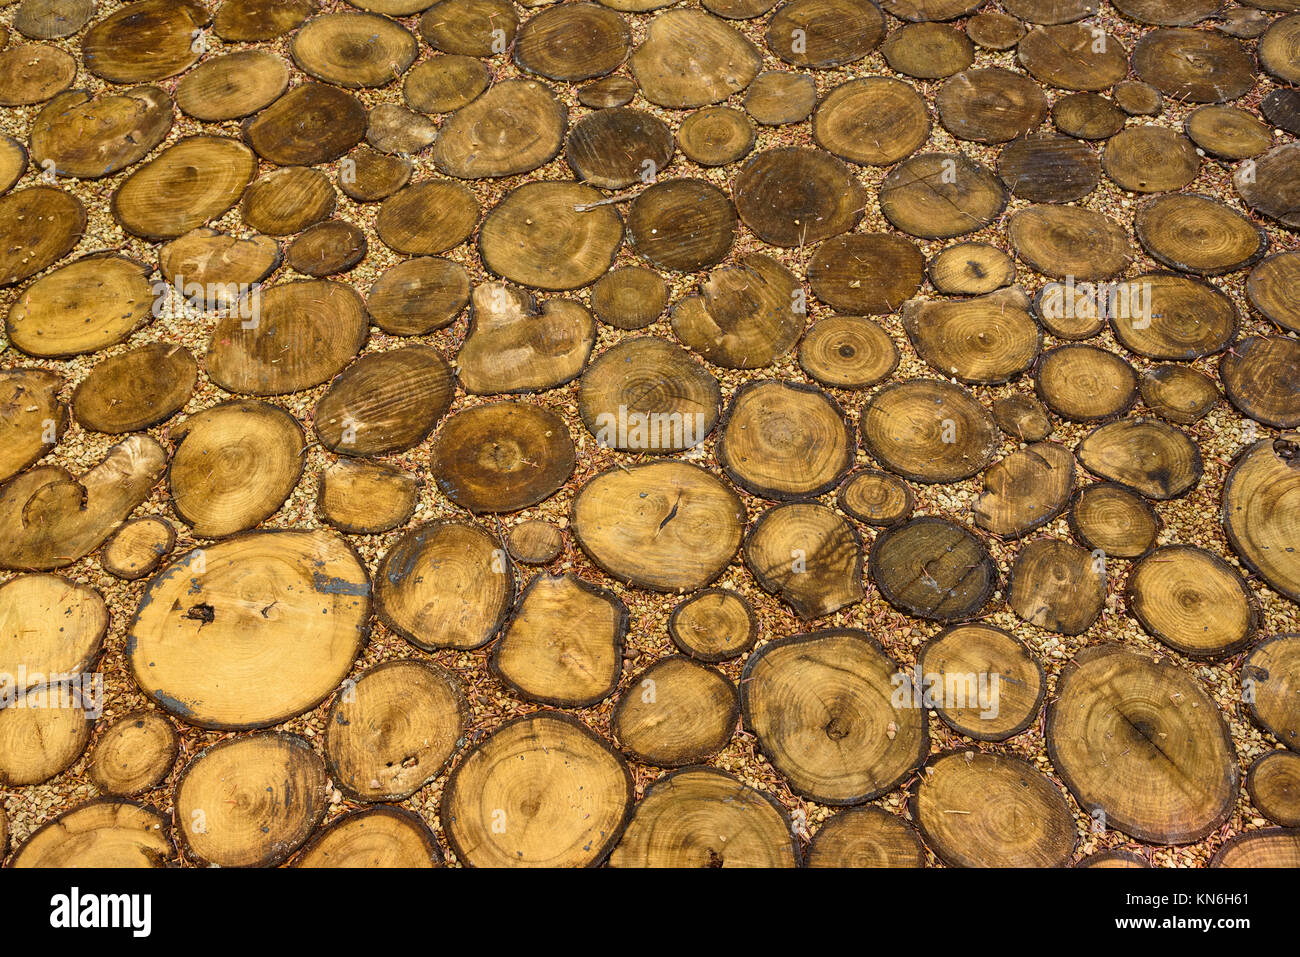 Pattern created by laying slices of tree trunks as a footpath, Plitvice Lakes National Park, Croatia Stock Photo